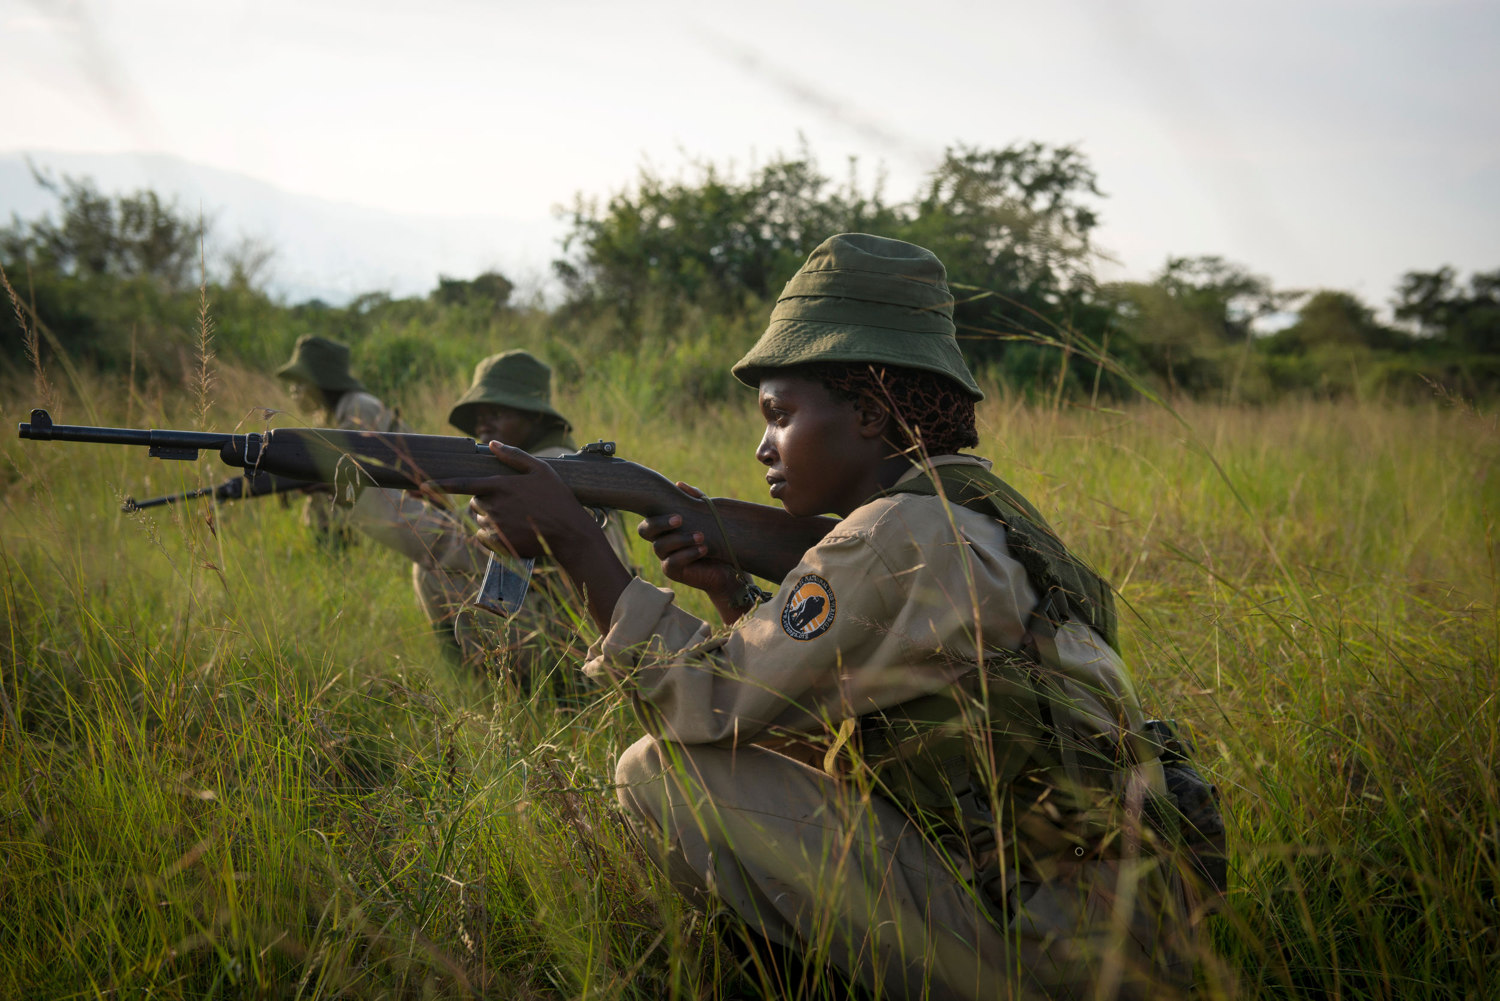  Rangers-in-Training during military style drills in the savannah. Patrols can last up to 6 hours in the scorching heat. Virunga's park guards responsibilities eclipse those of a typical park guard as the area is known to have incidents with local re